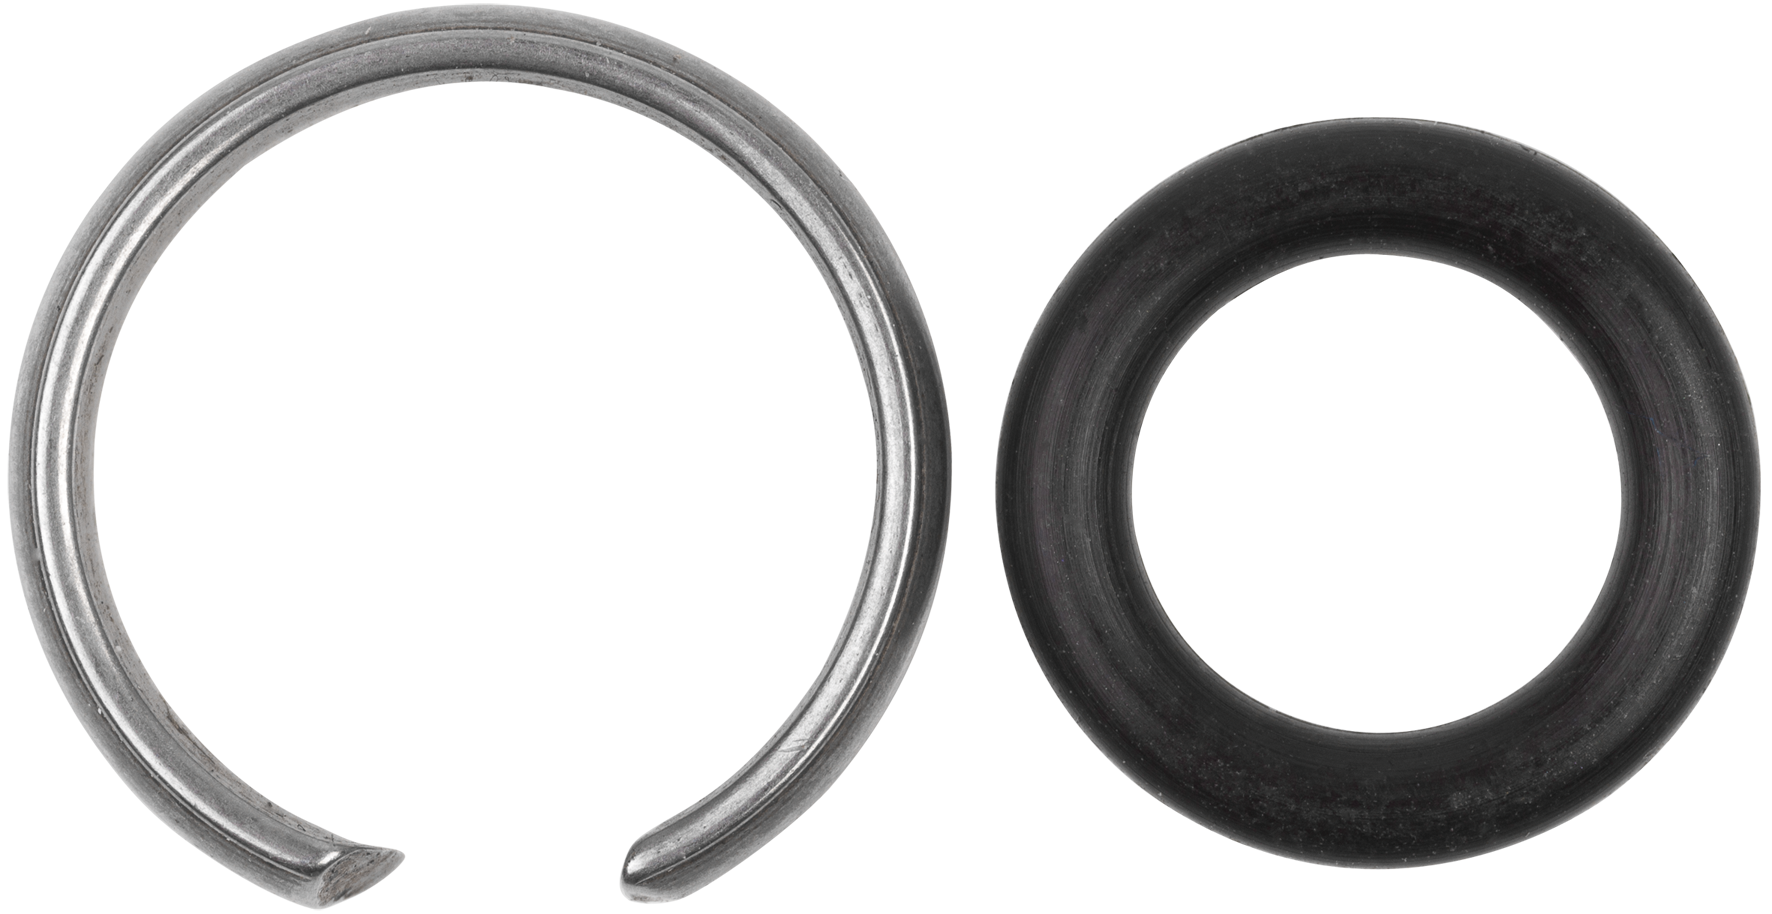 SWSTAHL Retaining ring for all 1/2” impact wrenches S3246-1